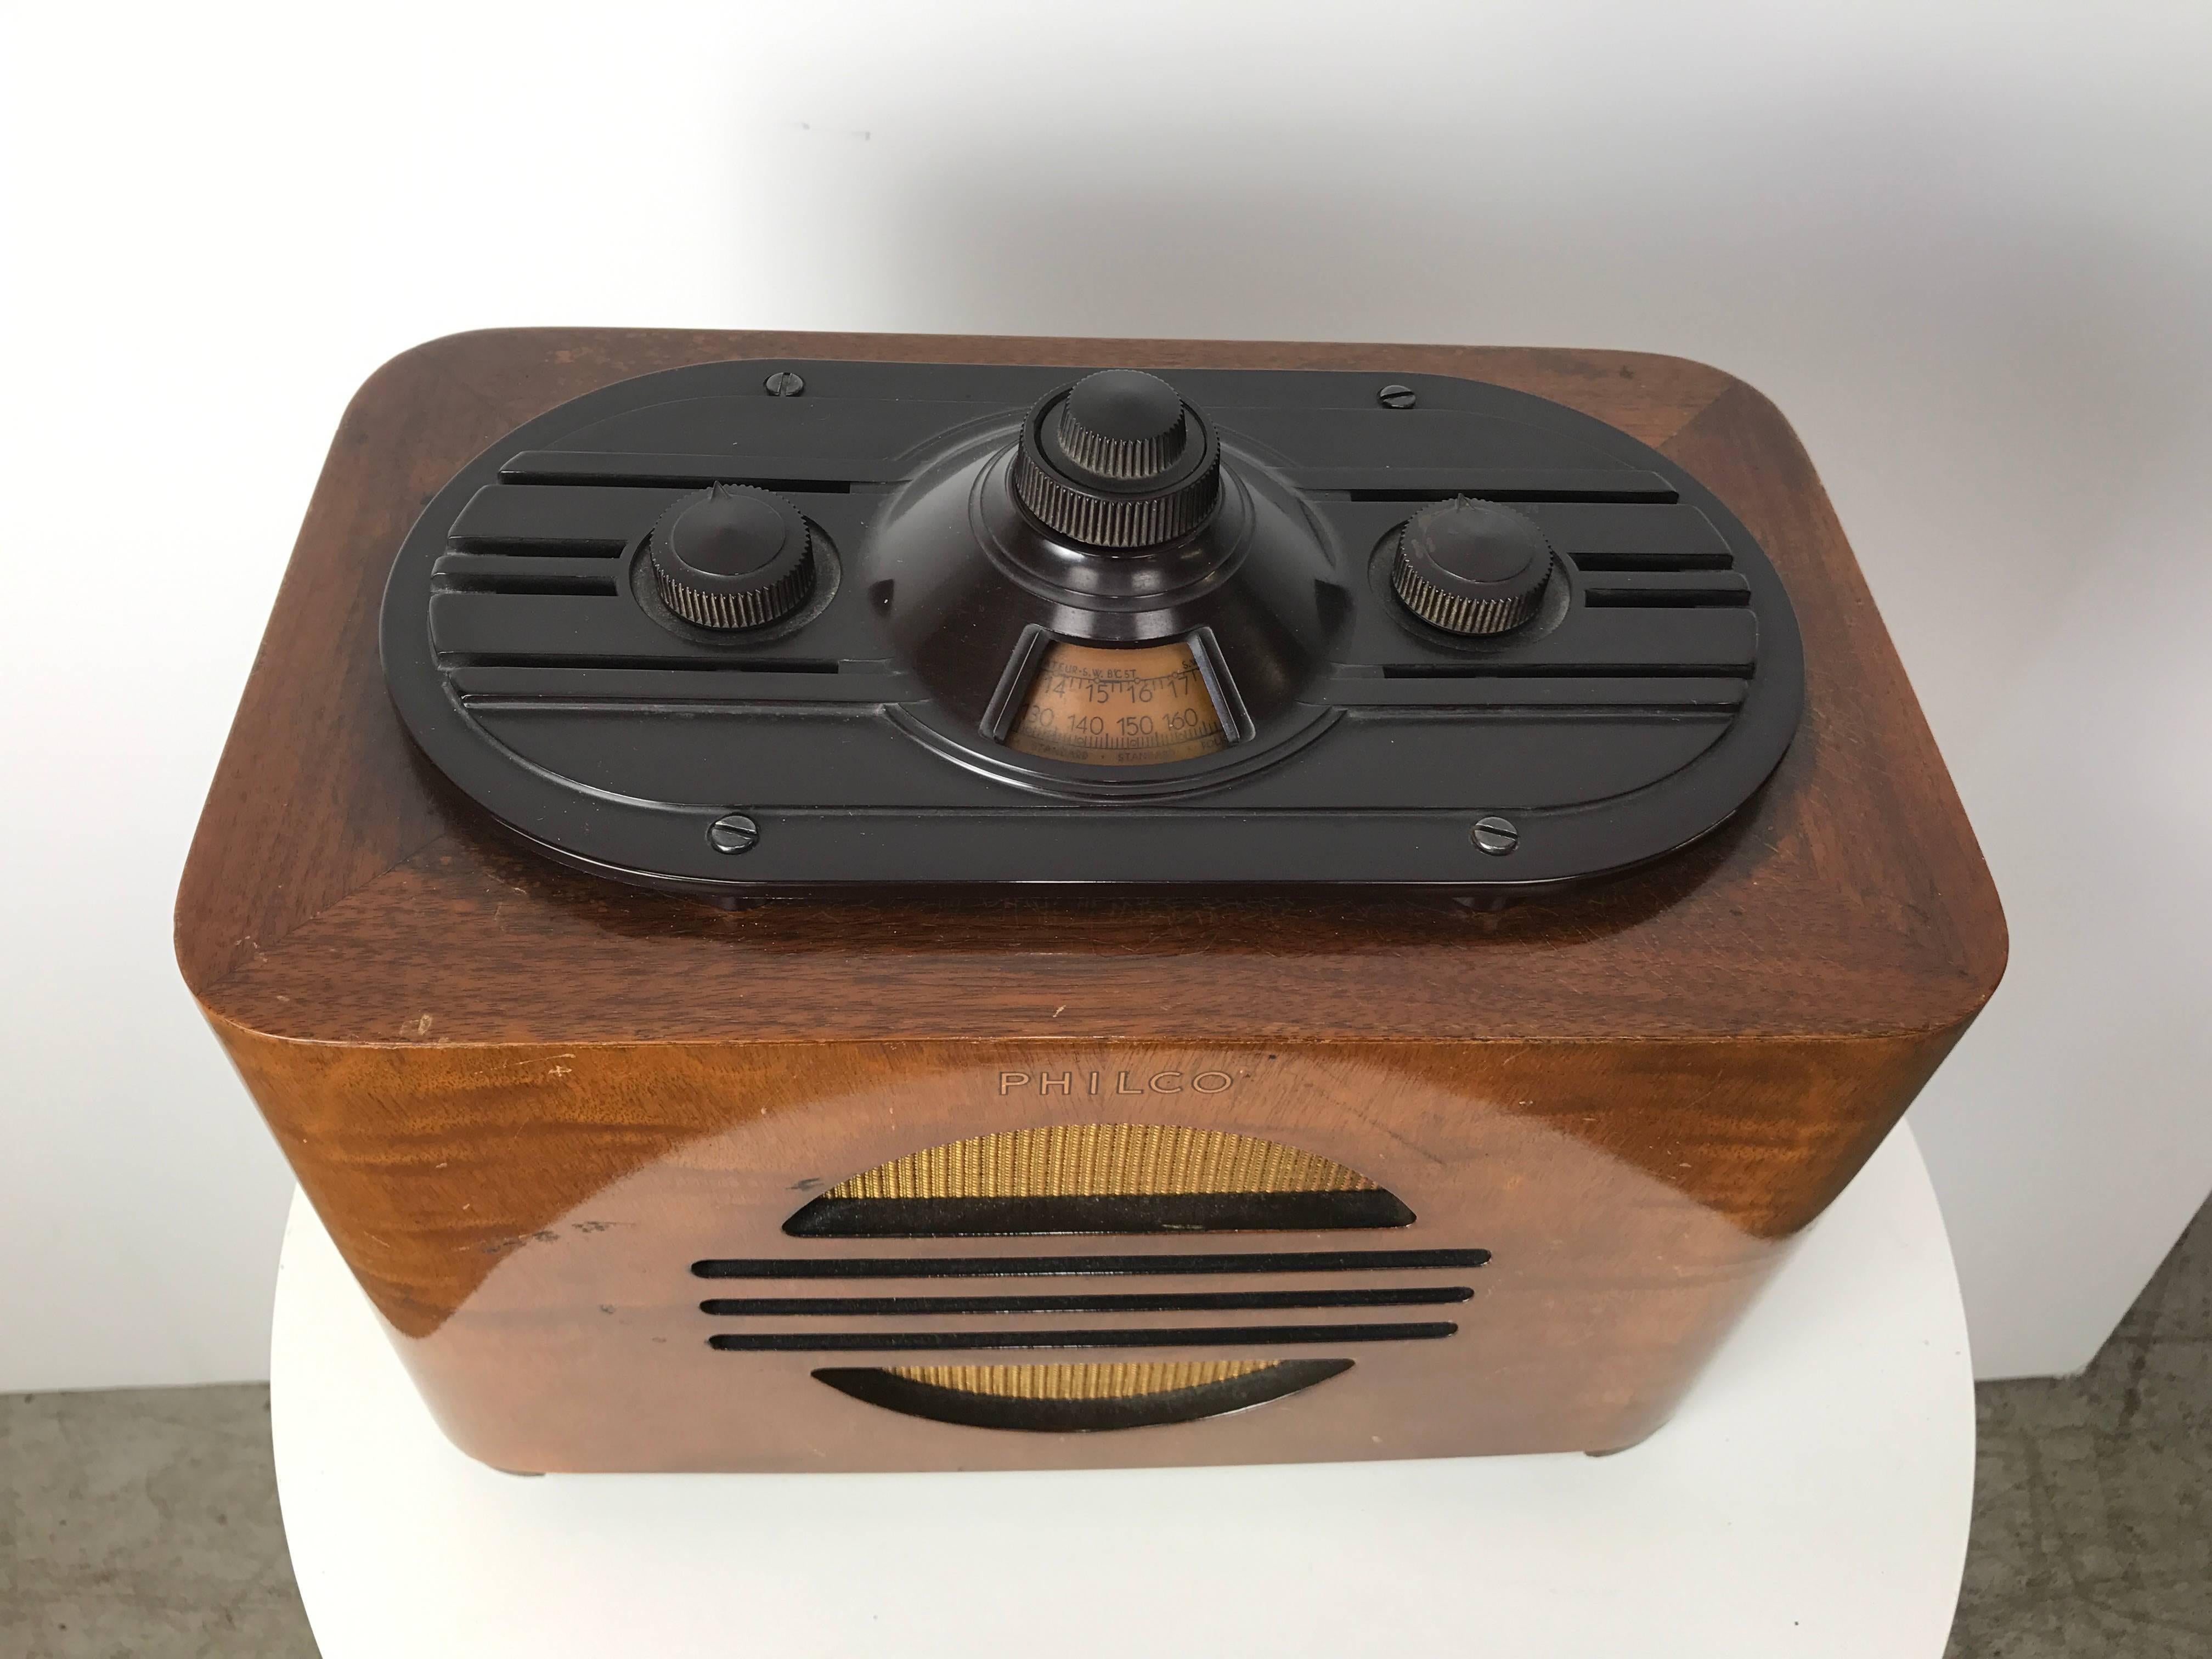 Walnut and Bakelite streamline tube radio manufactured by Philco designed by Norman Bel Geddes, Amazing Art Deco design, excellent original condition, Unusual Bakelite tuner, volume configuration, speakers on each side, tested and works perfectly.